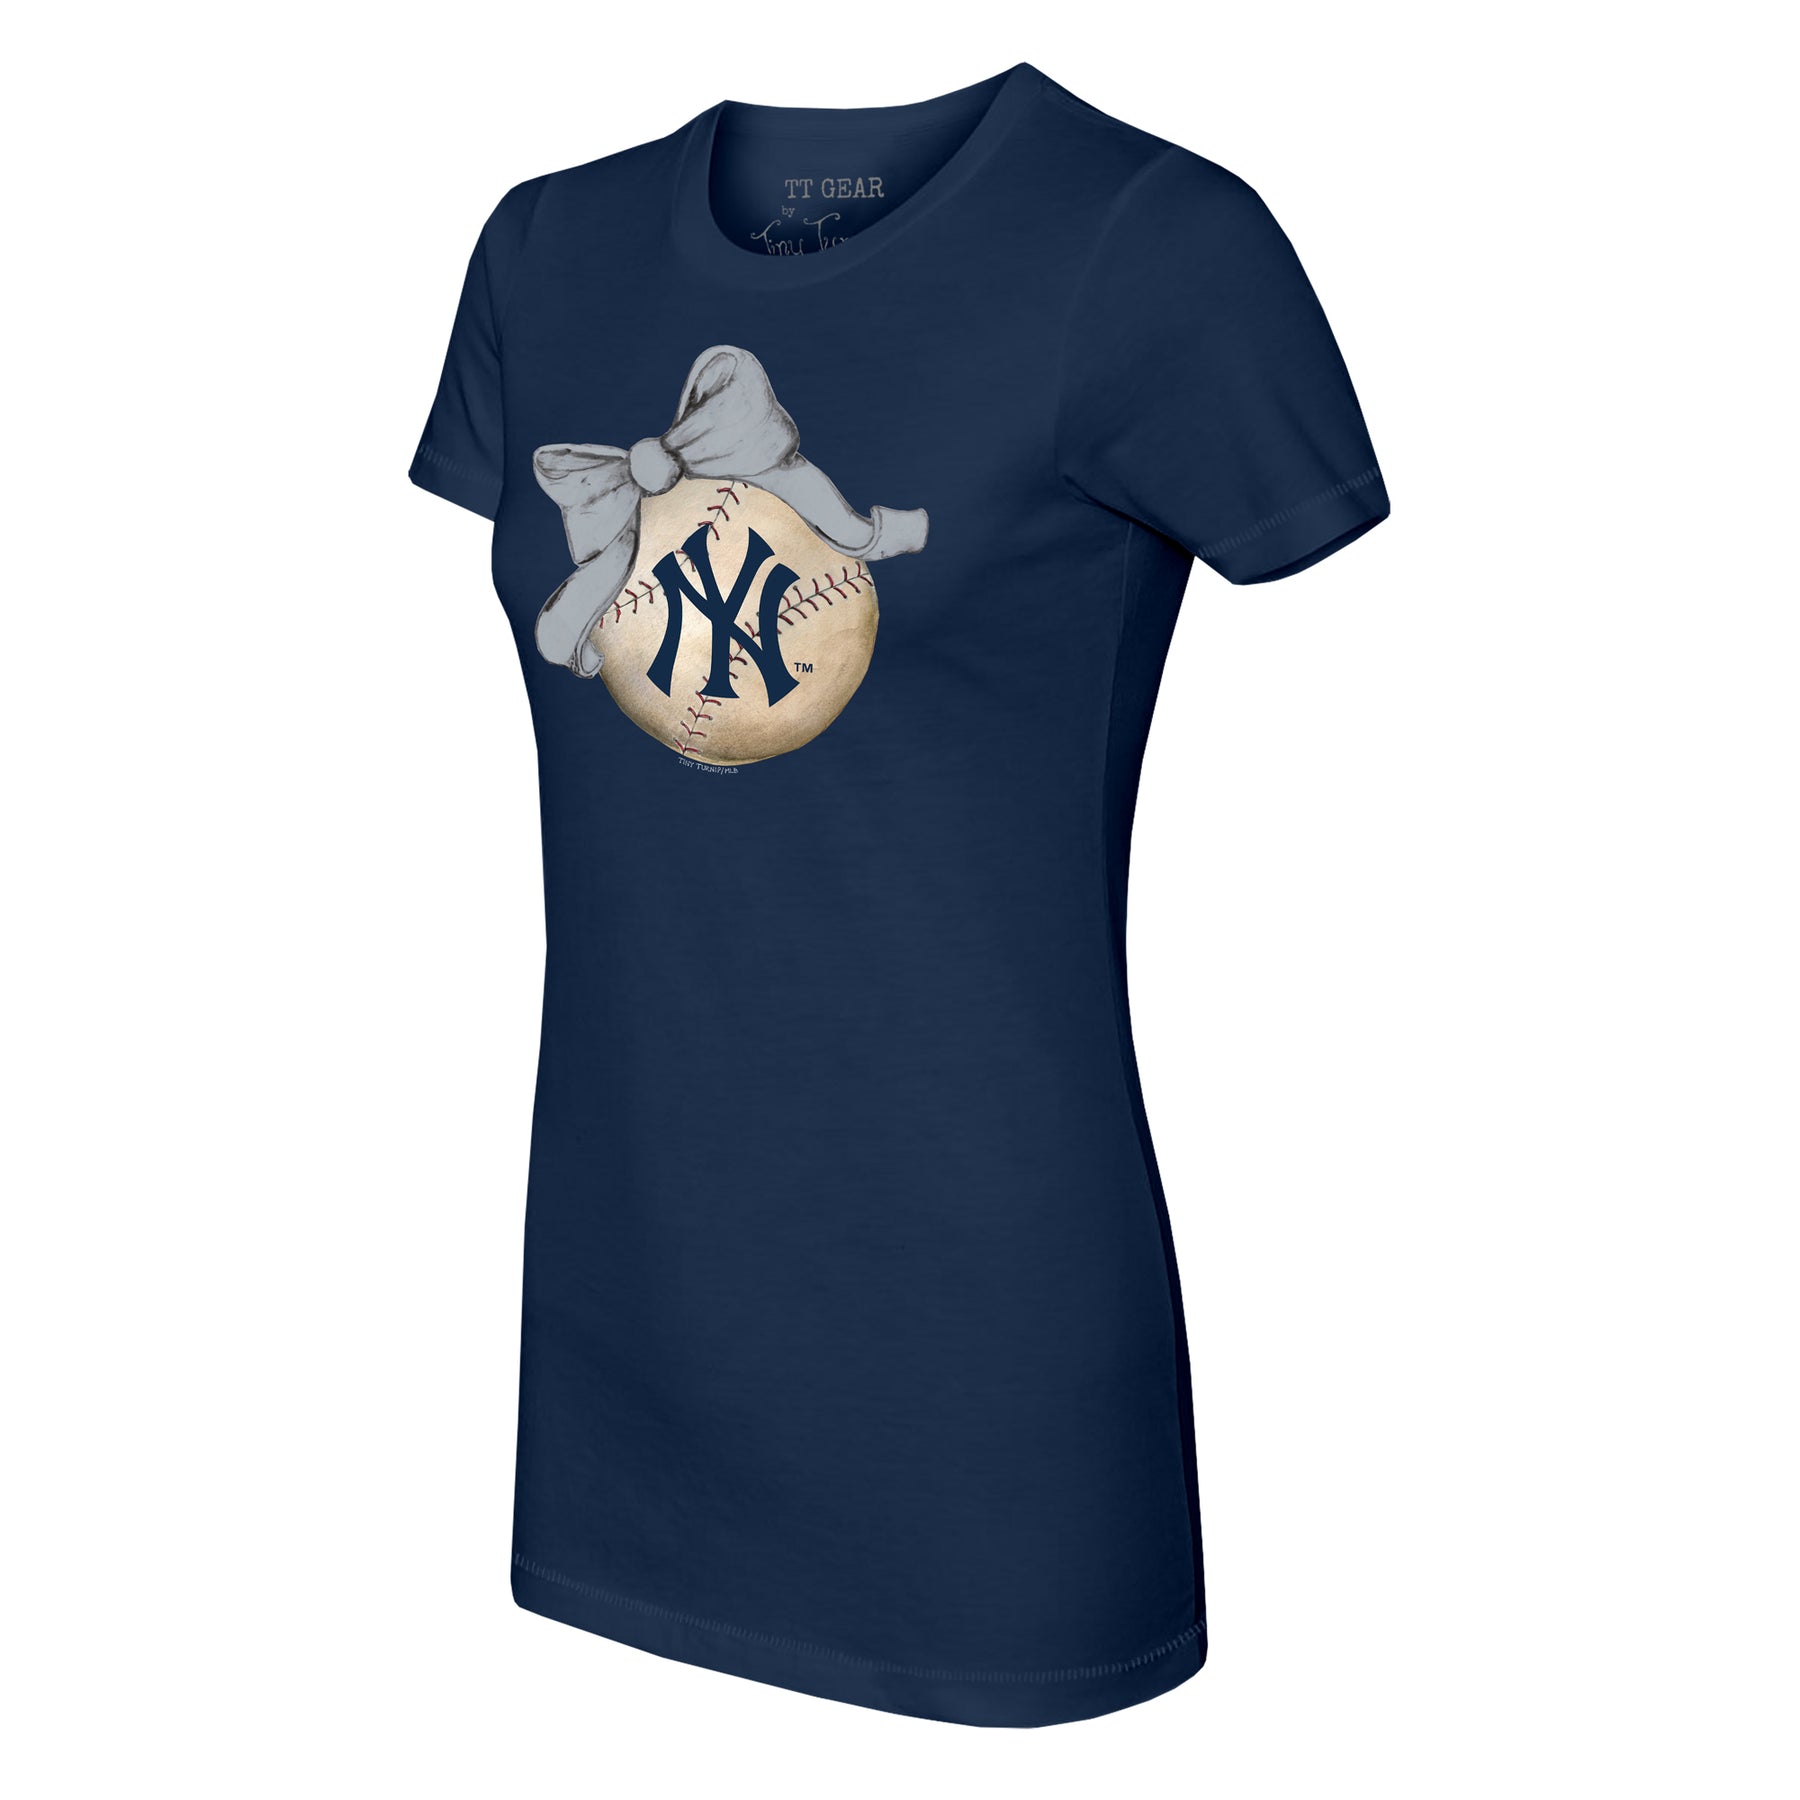 Yankees T-Shirts for Sale